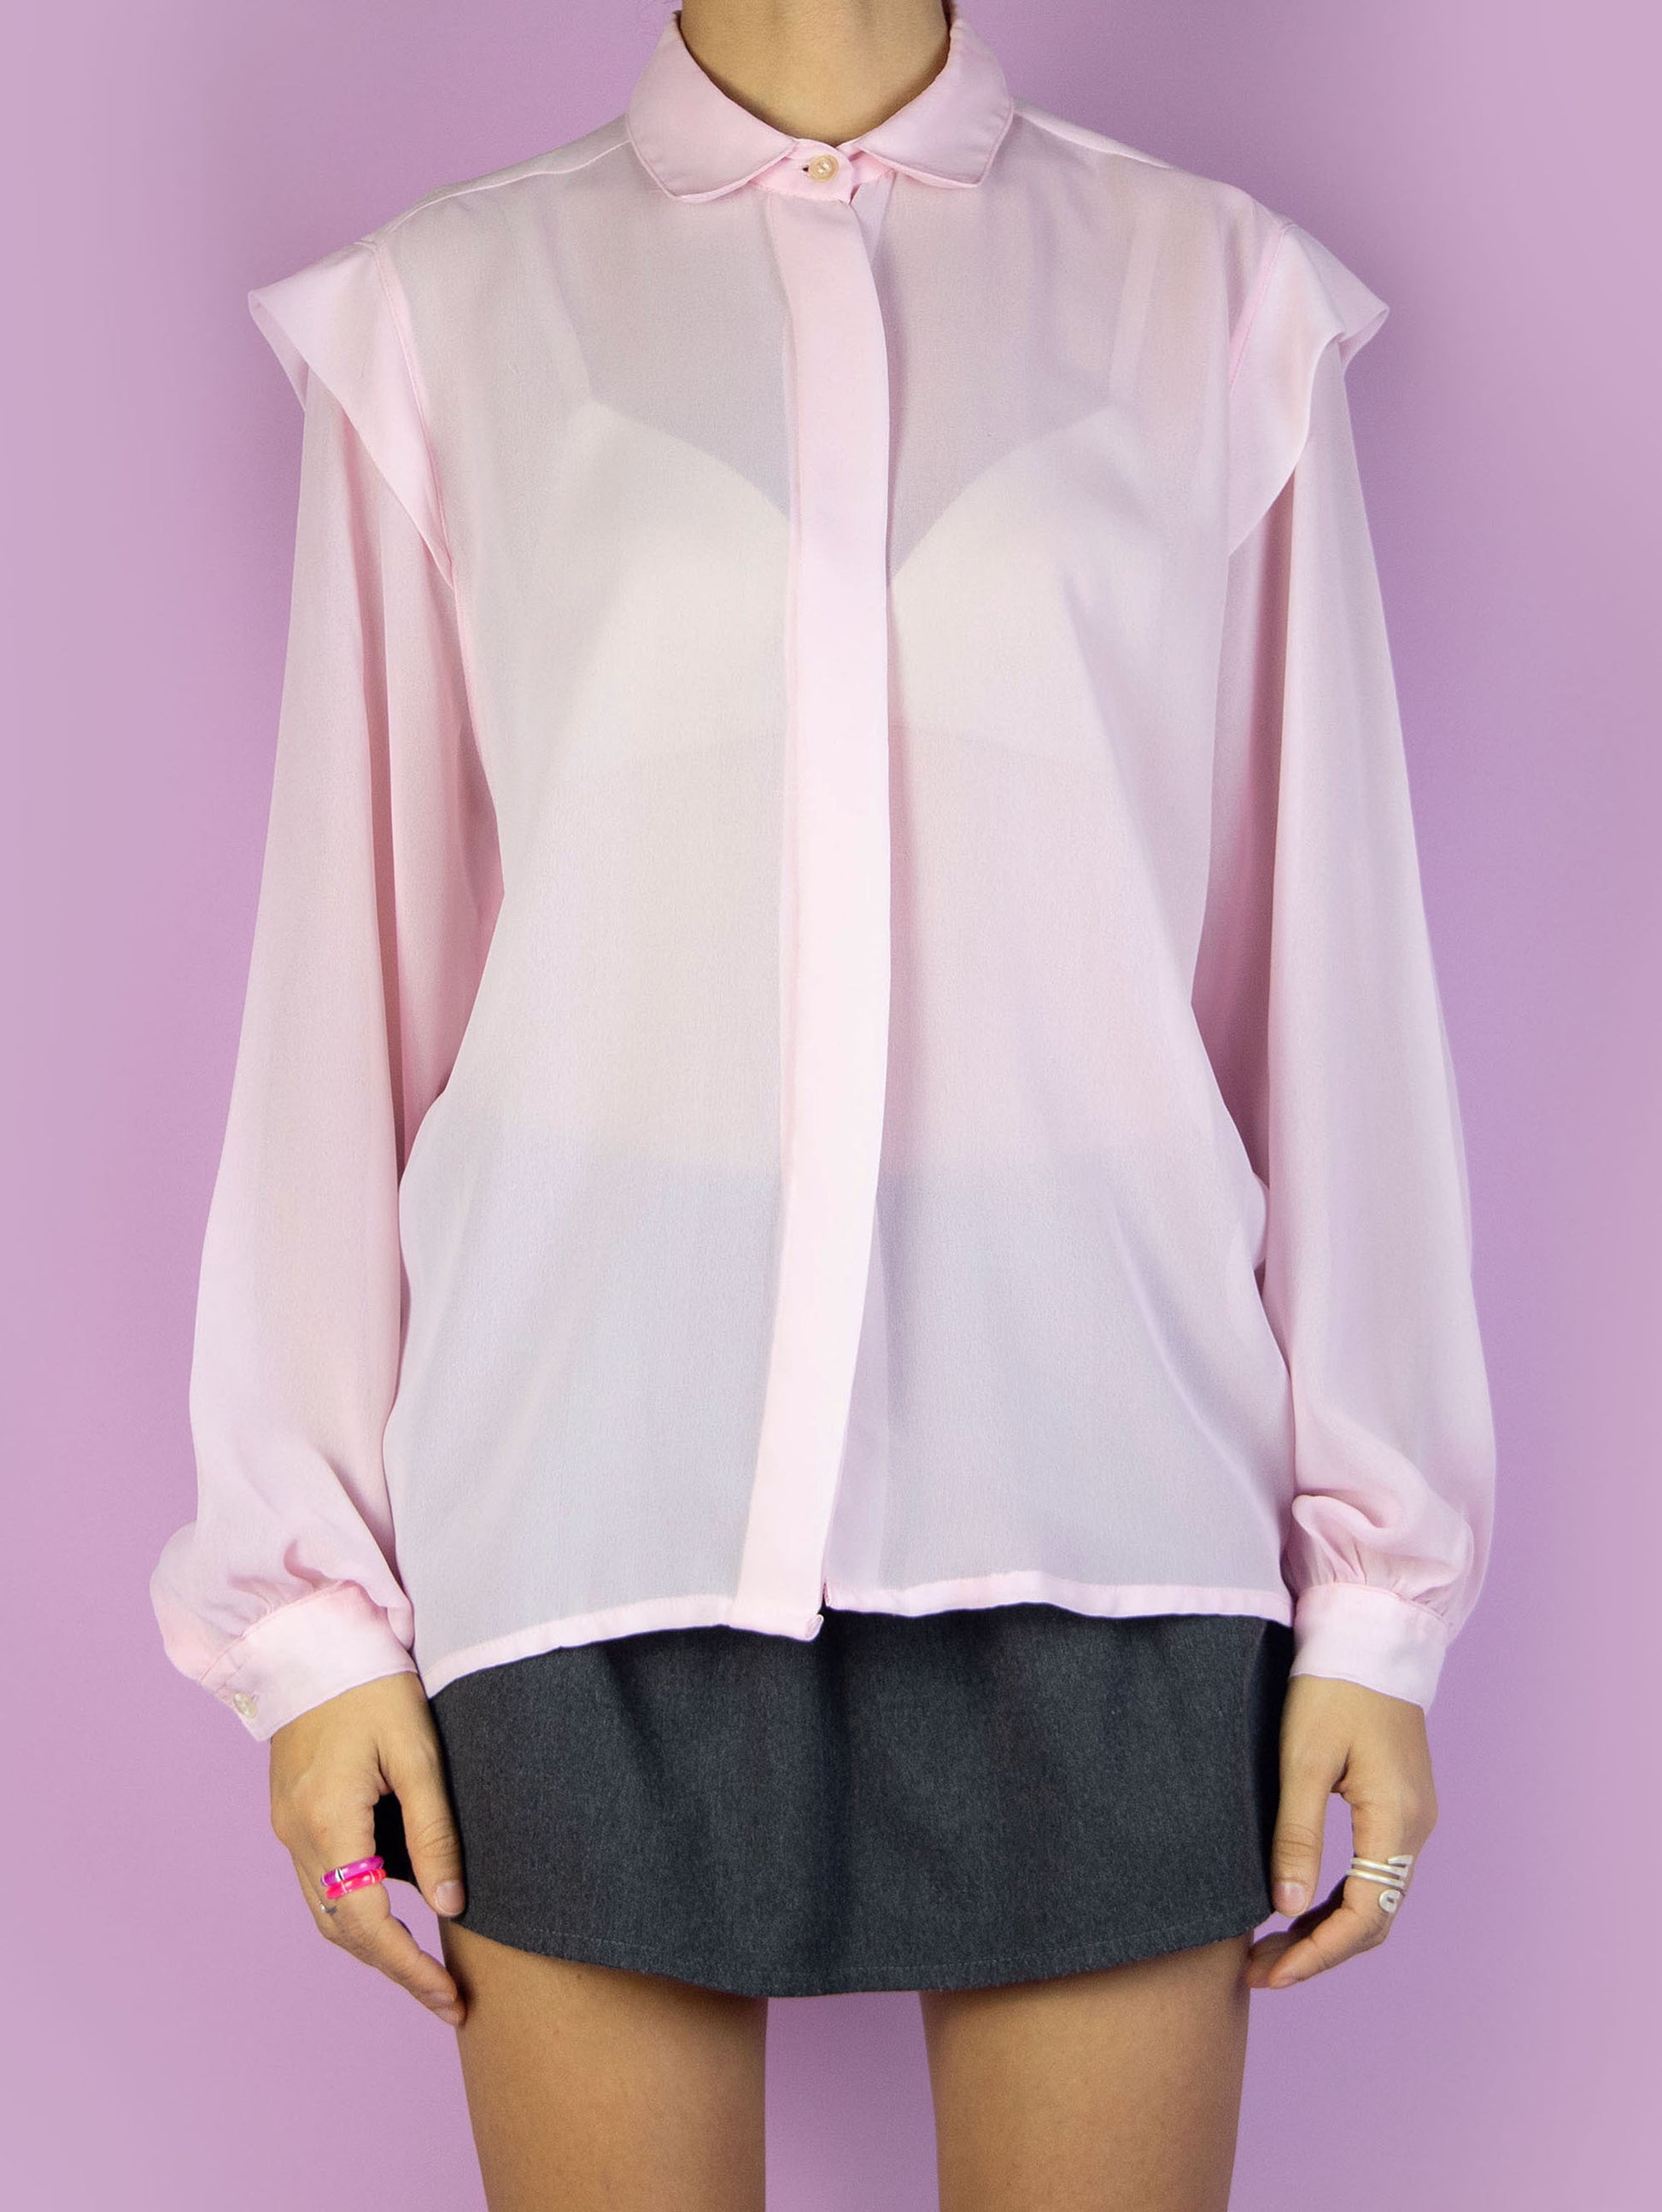 The Vintage 90s Pink Sheer Romantic Blouse is an elegant preppy coquette pastel light pink shirt with a collar and button closure.